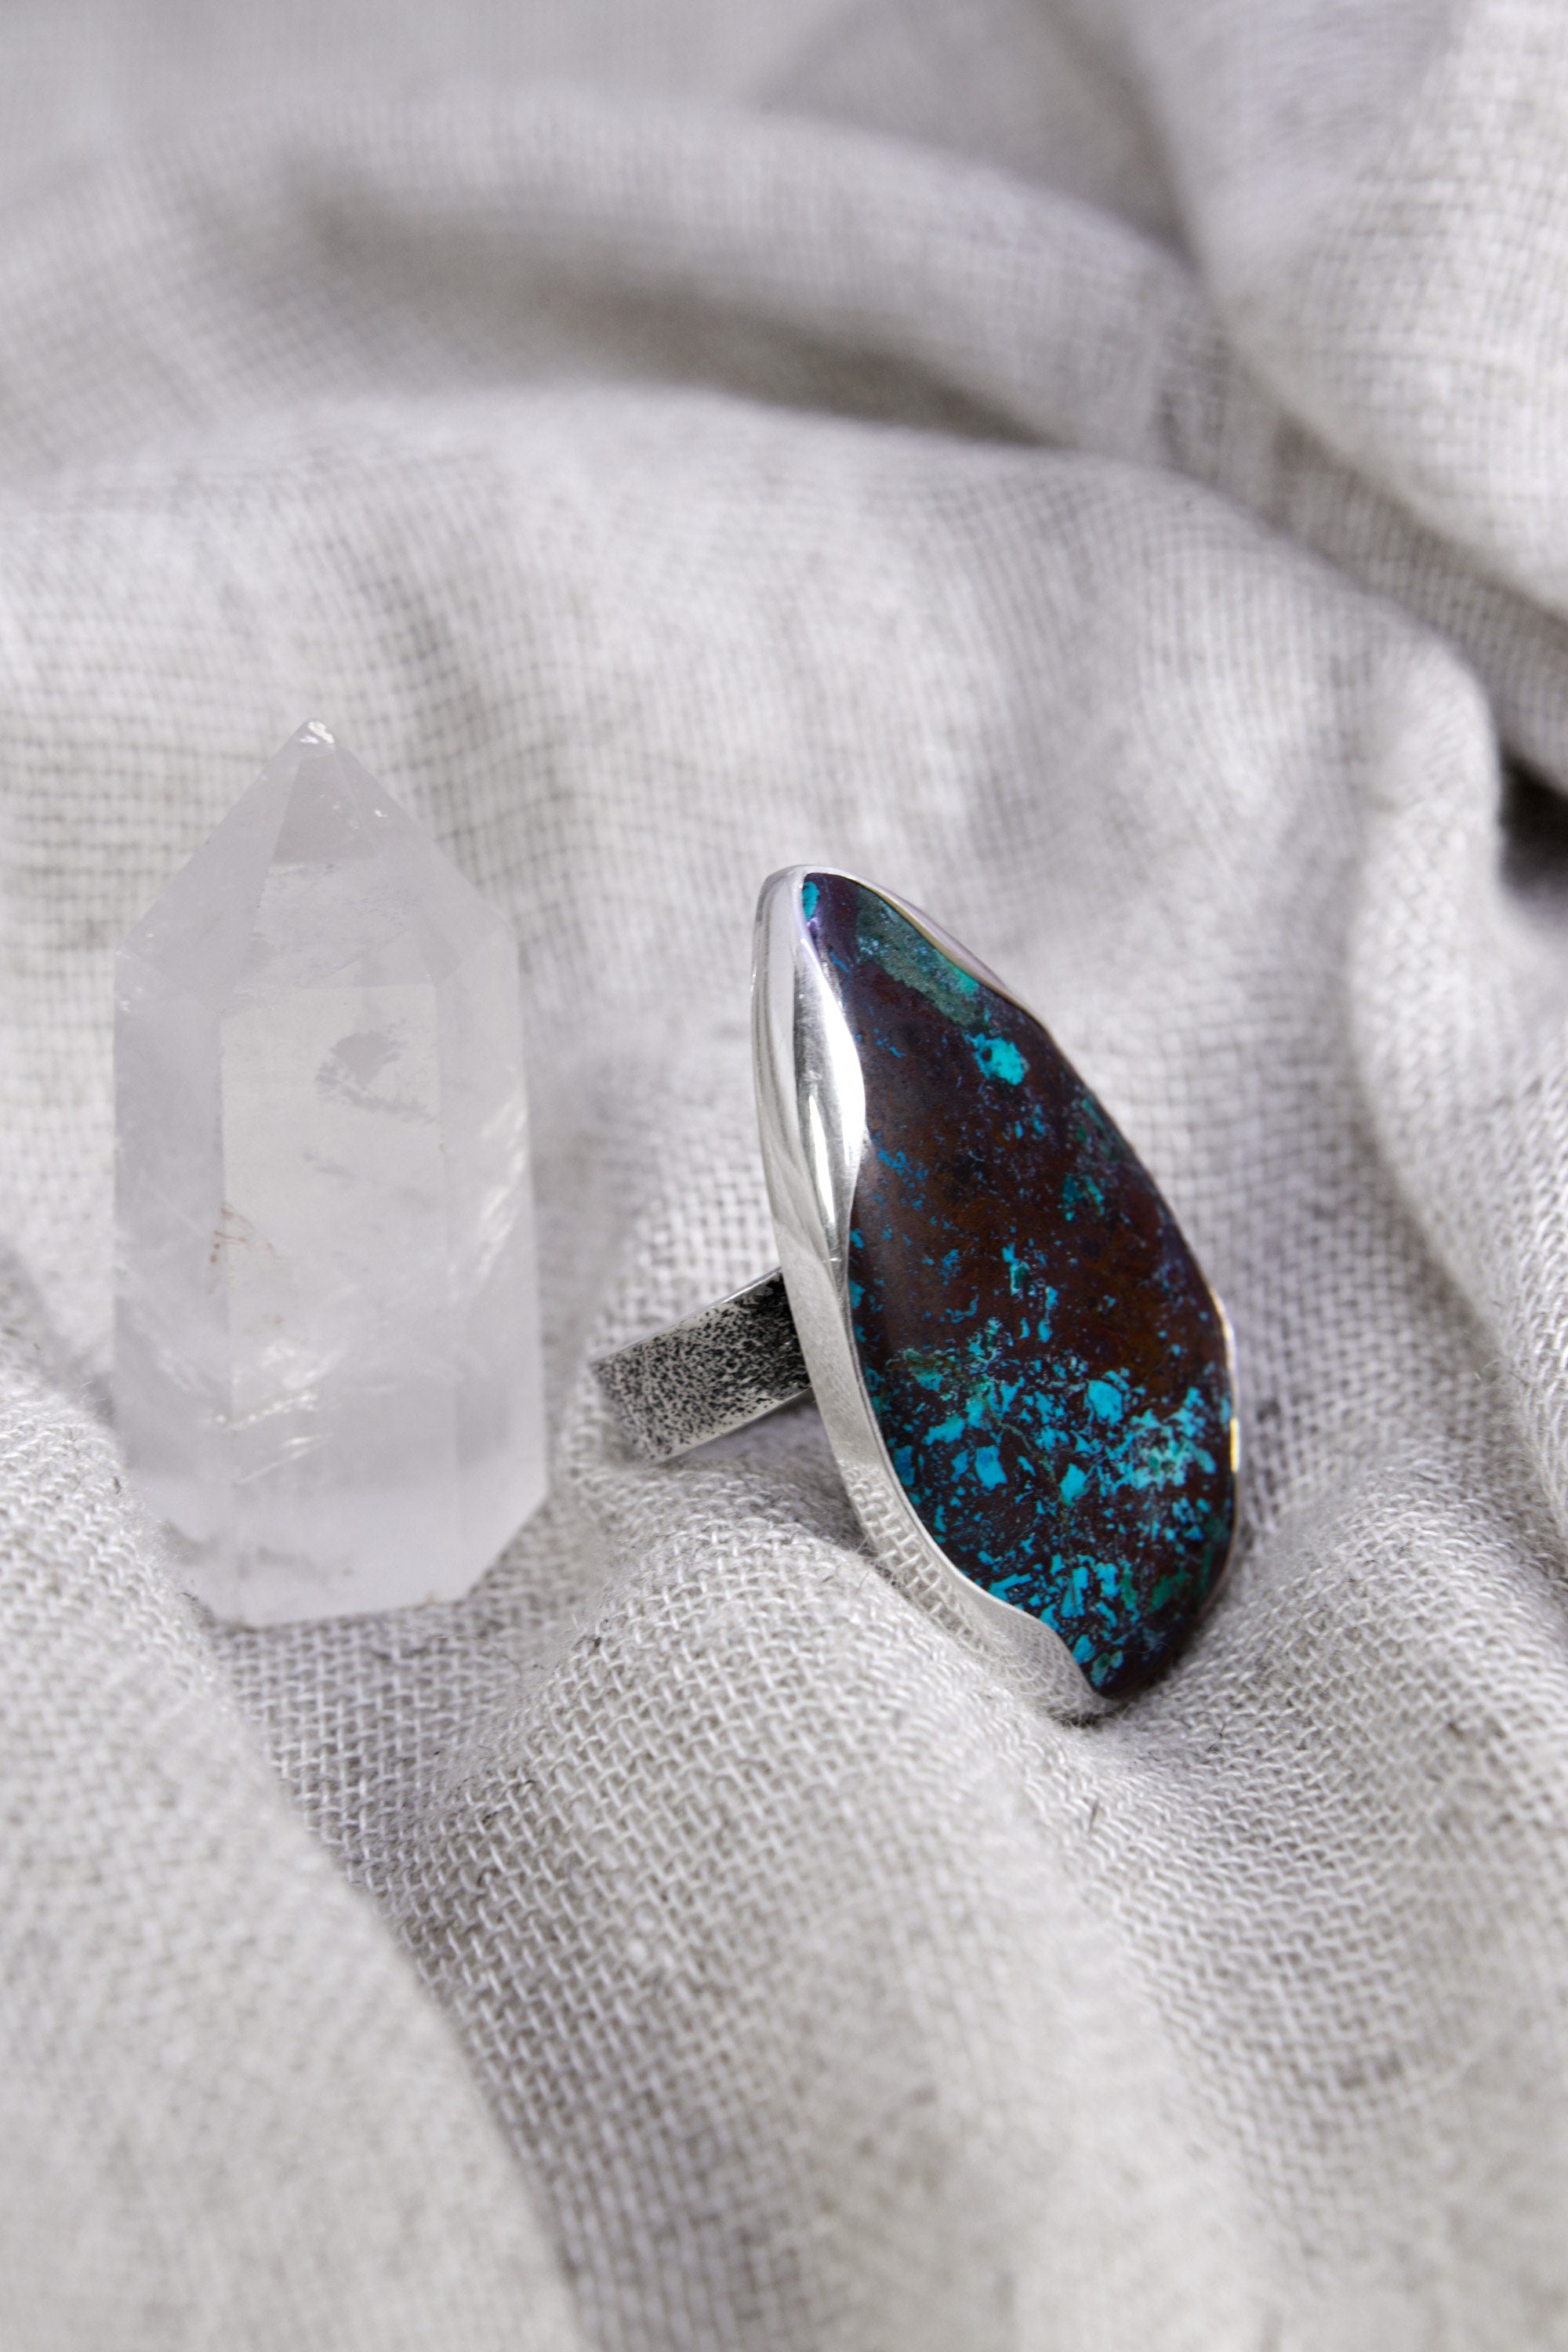 Embrace the Serene Radiance: Adjustable Sterling Silver Ring with Teardrop Turquoise - Unisex - Size 5-12 US